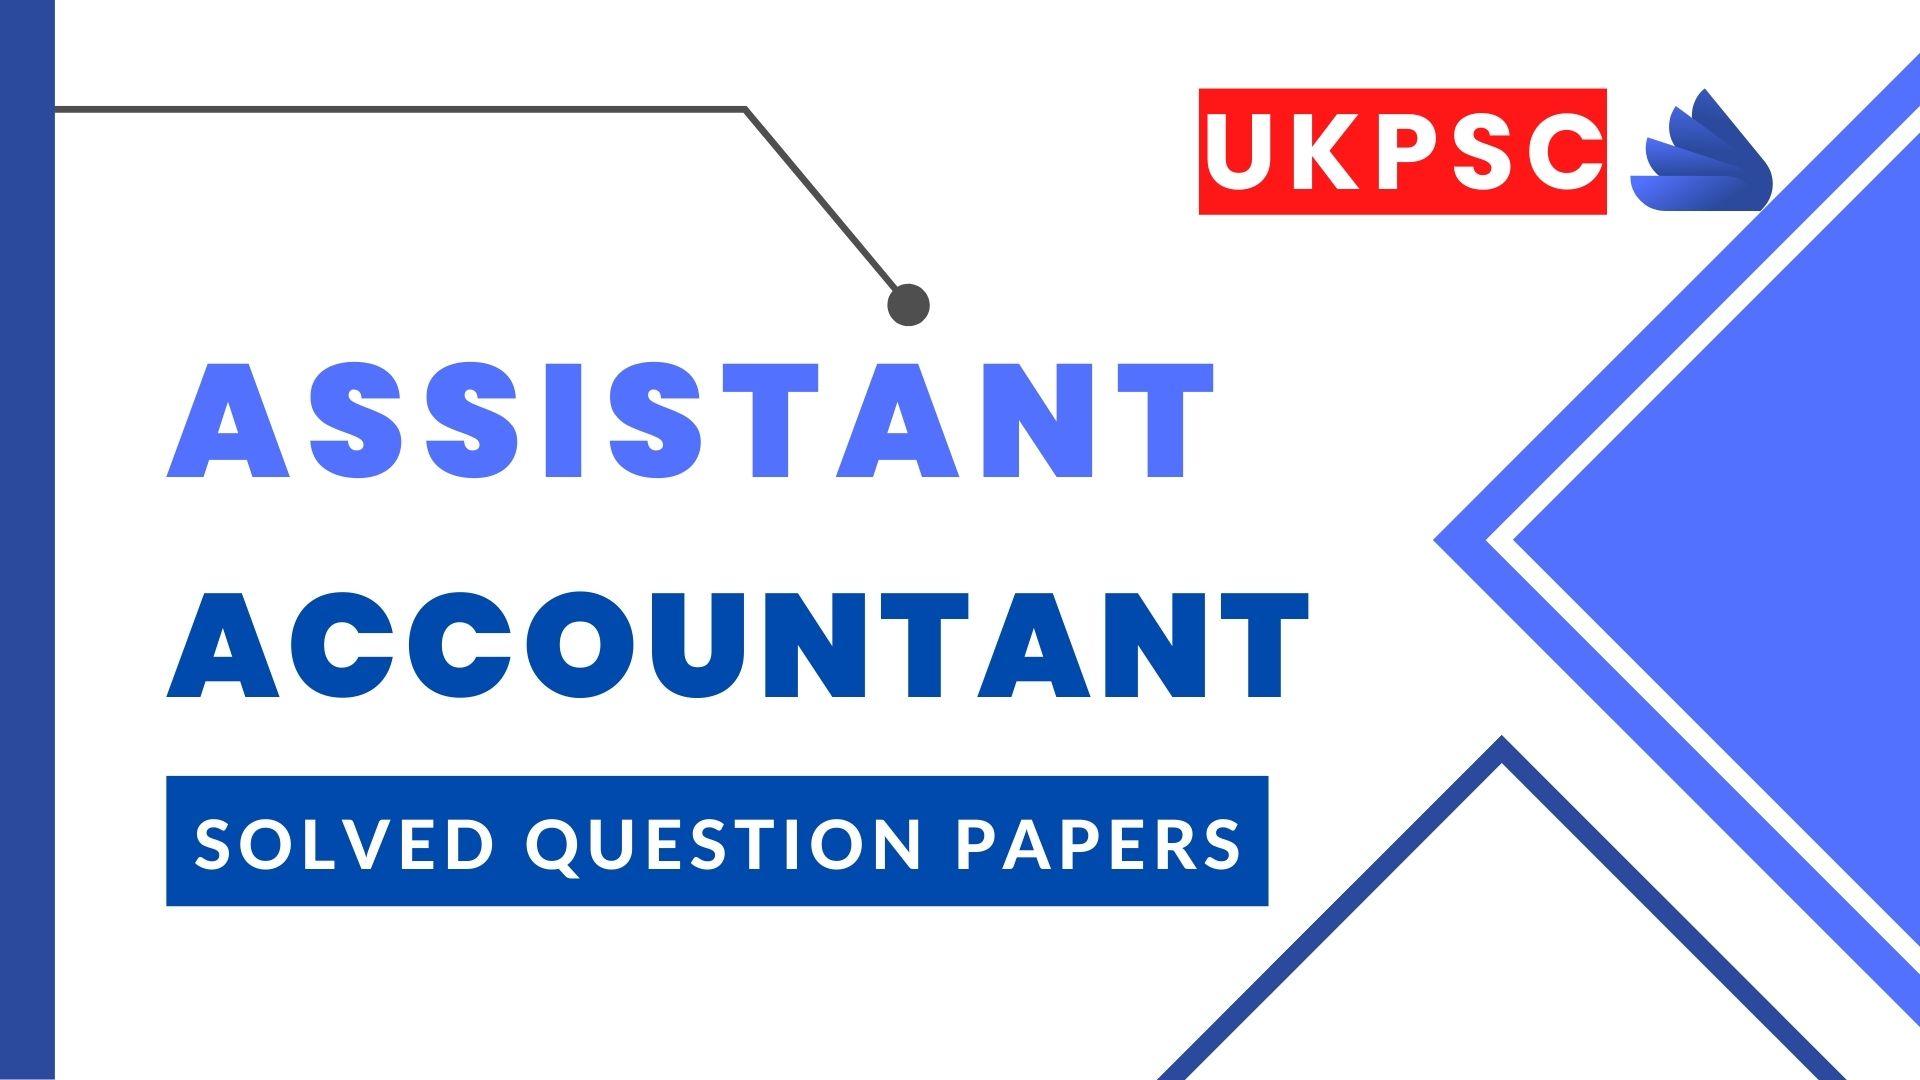 ukpsc assistant accountant solved question paper 2020